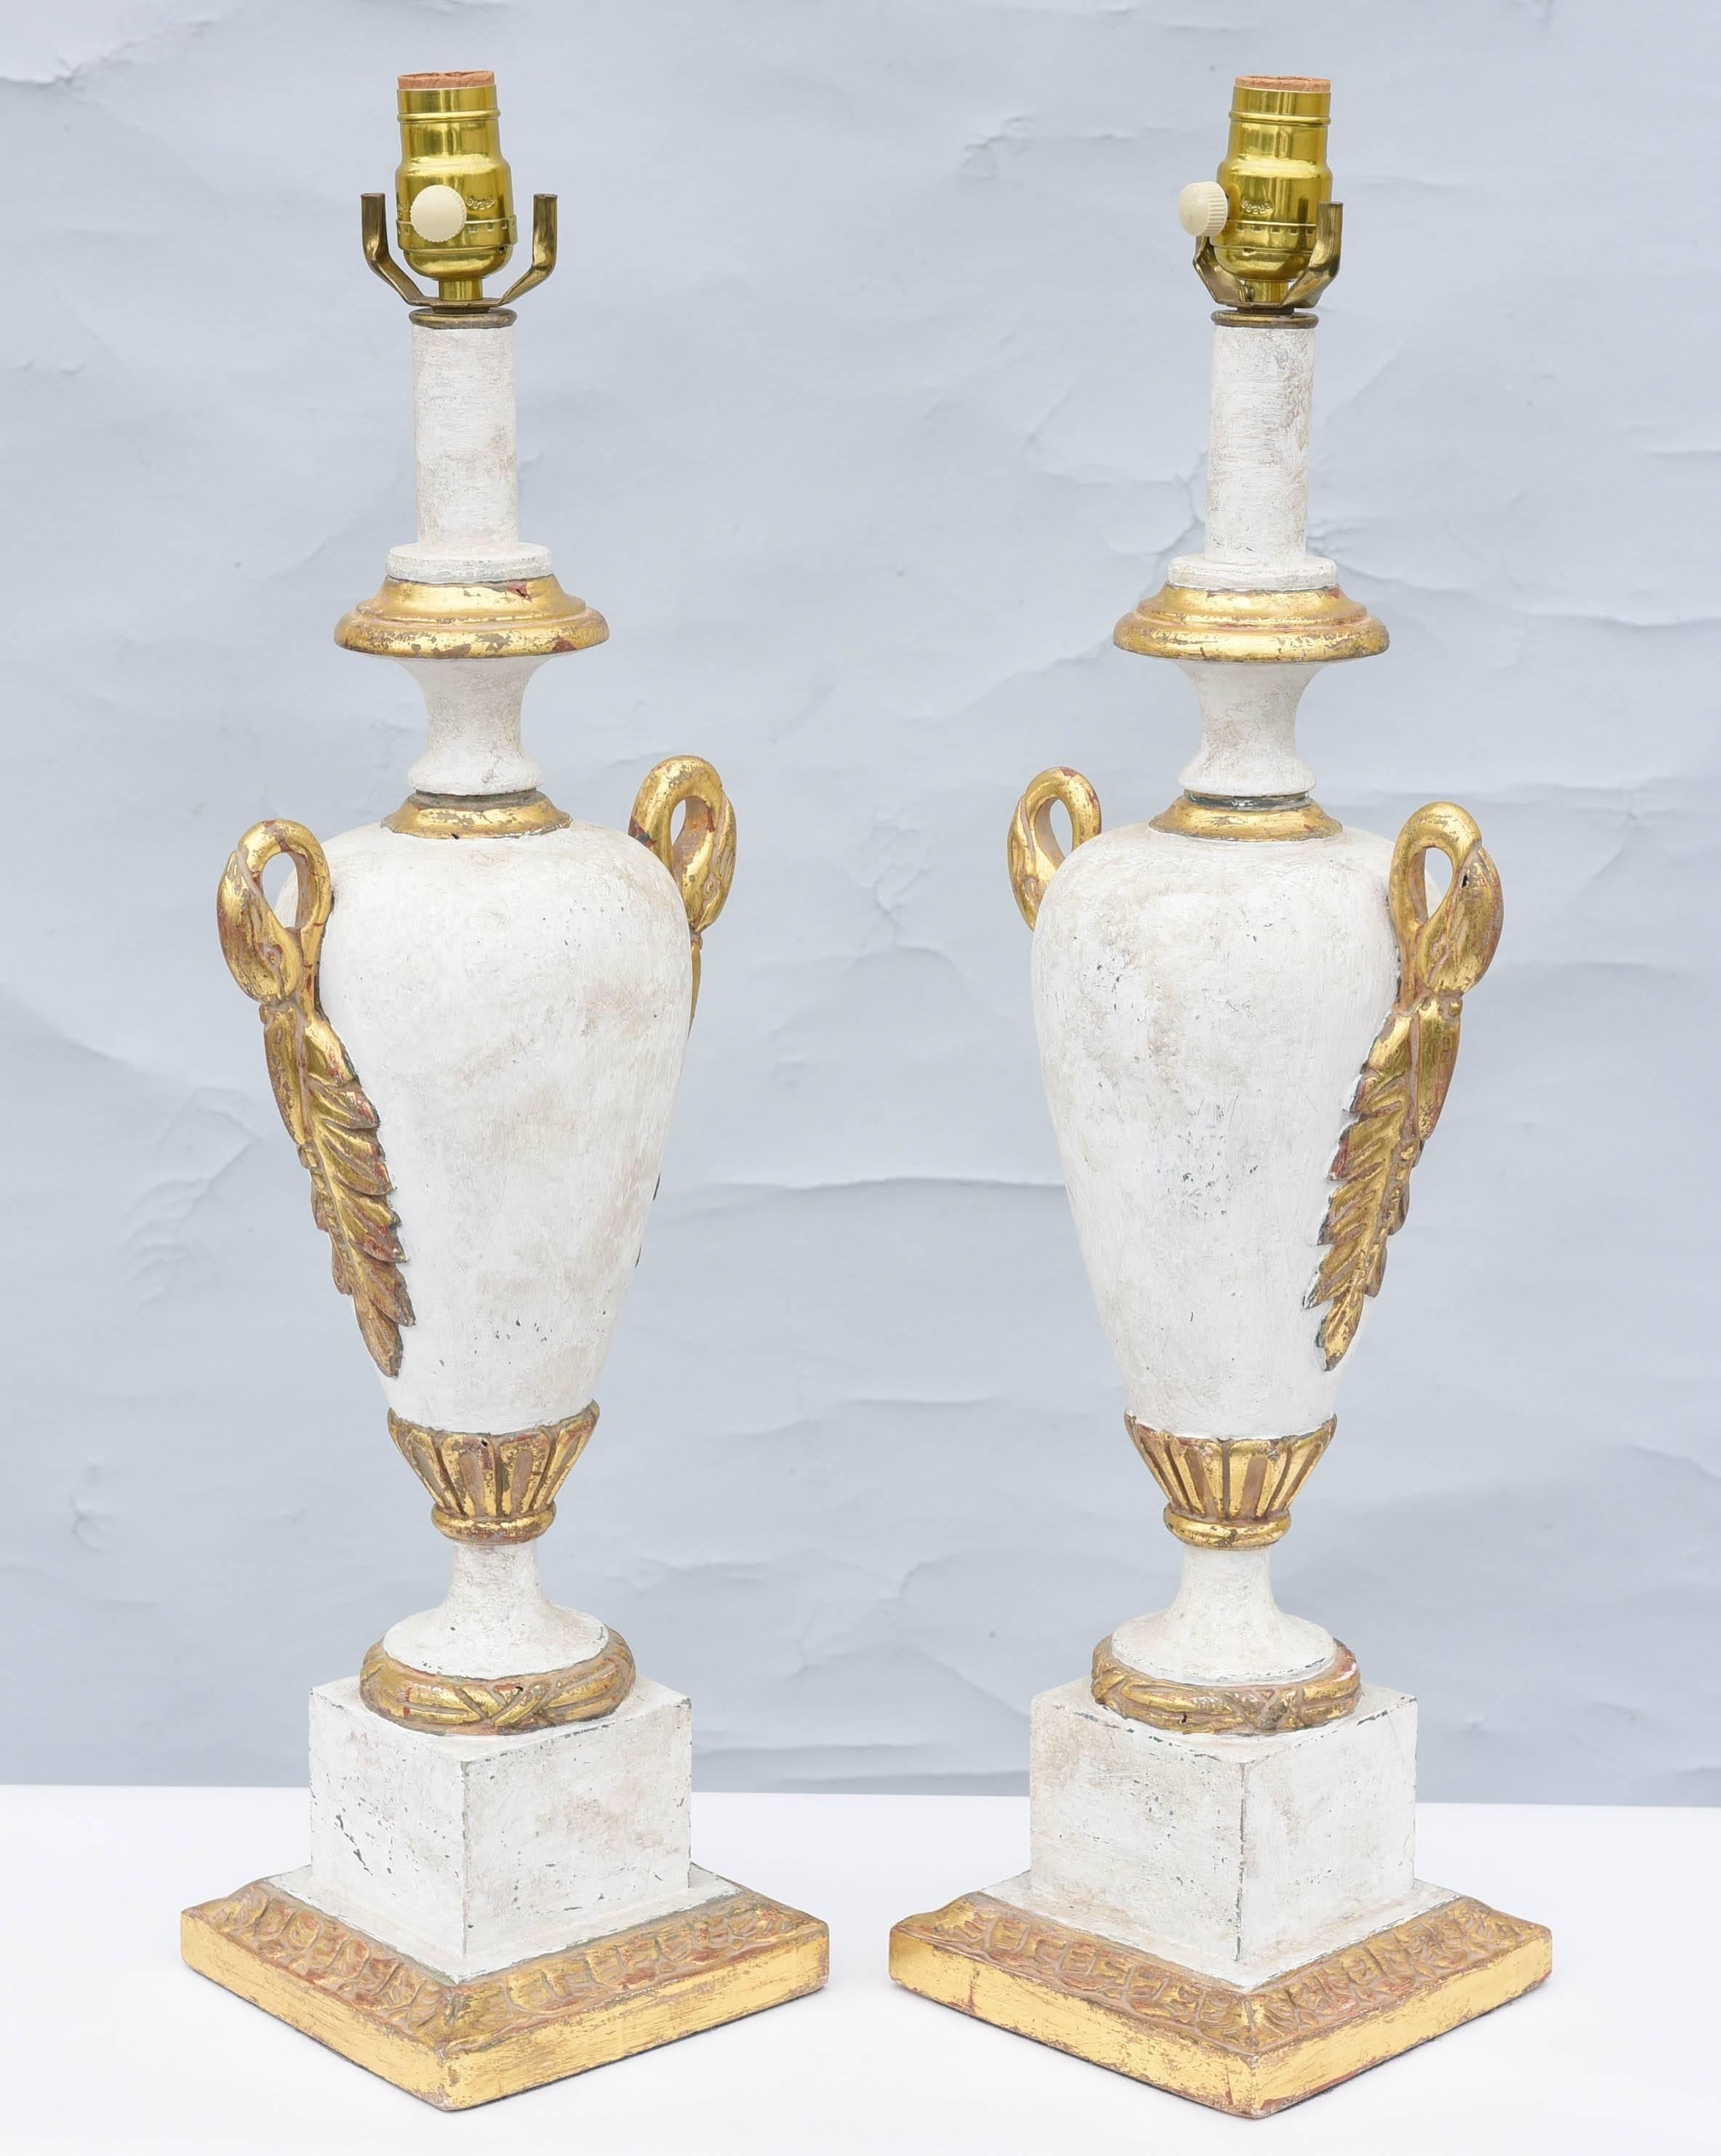 Pair of painted and parcel gilt lamps, each a wooden urn form, with white, mottled, and gessoed finish, flanked by gilded swan neck and acanthus handles, on round foot and square plinth.  

Stock ID: D7344